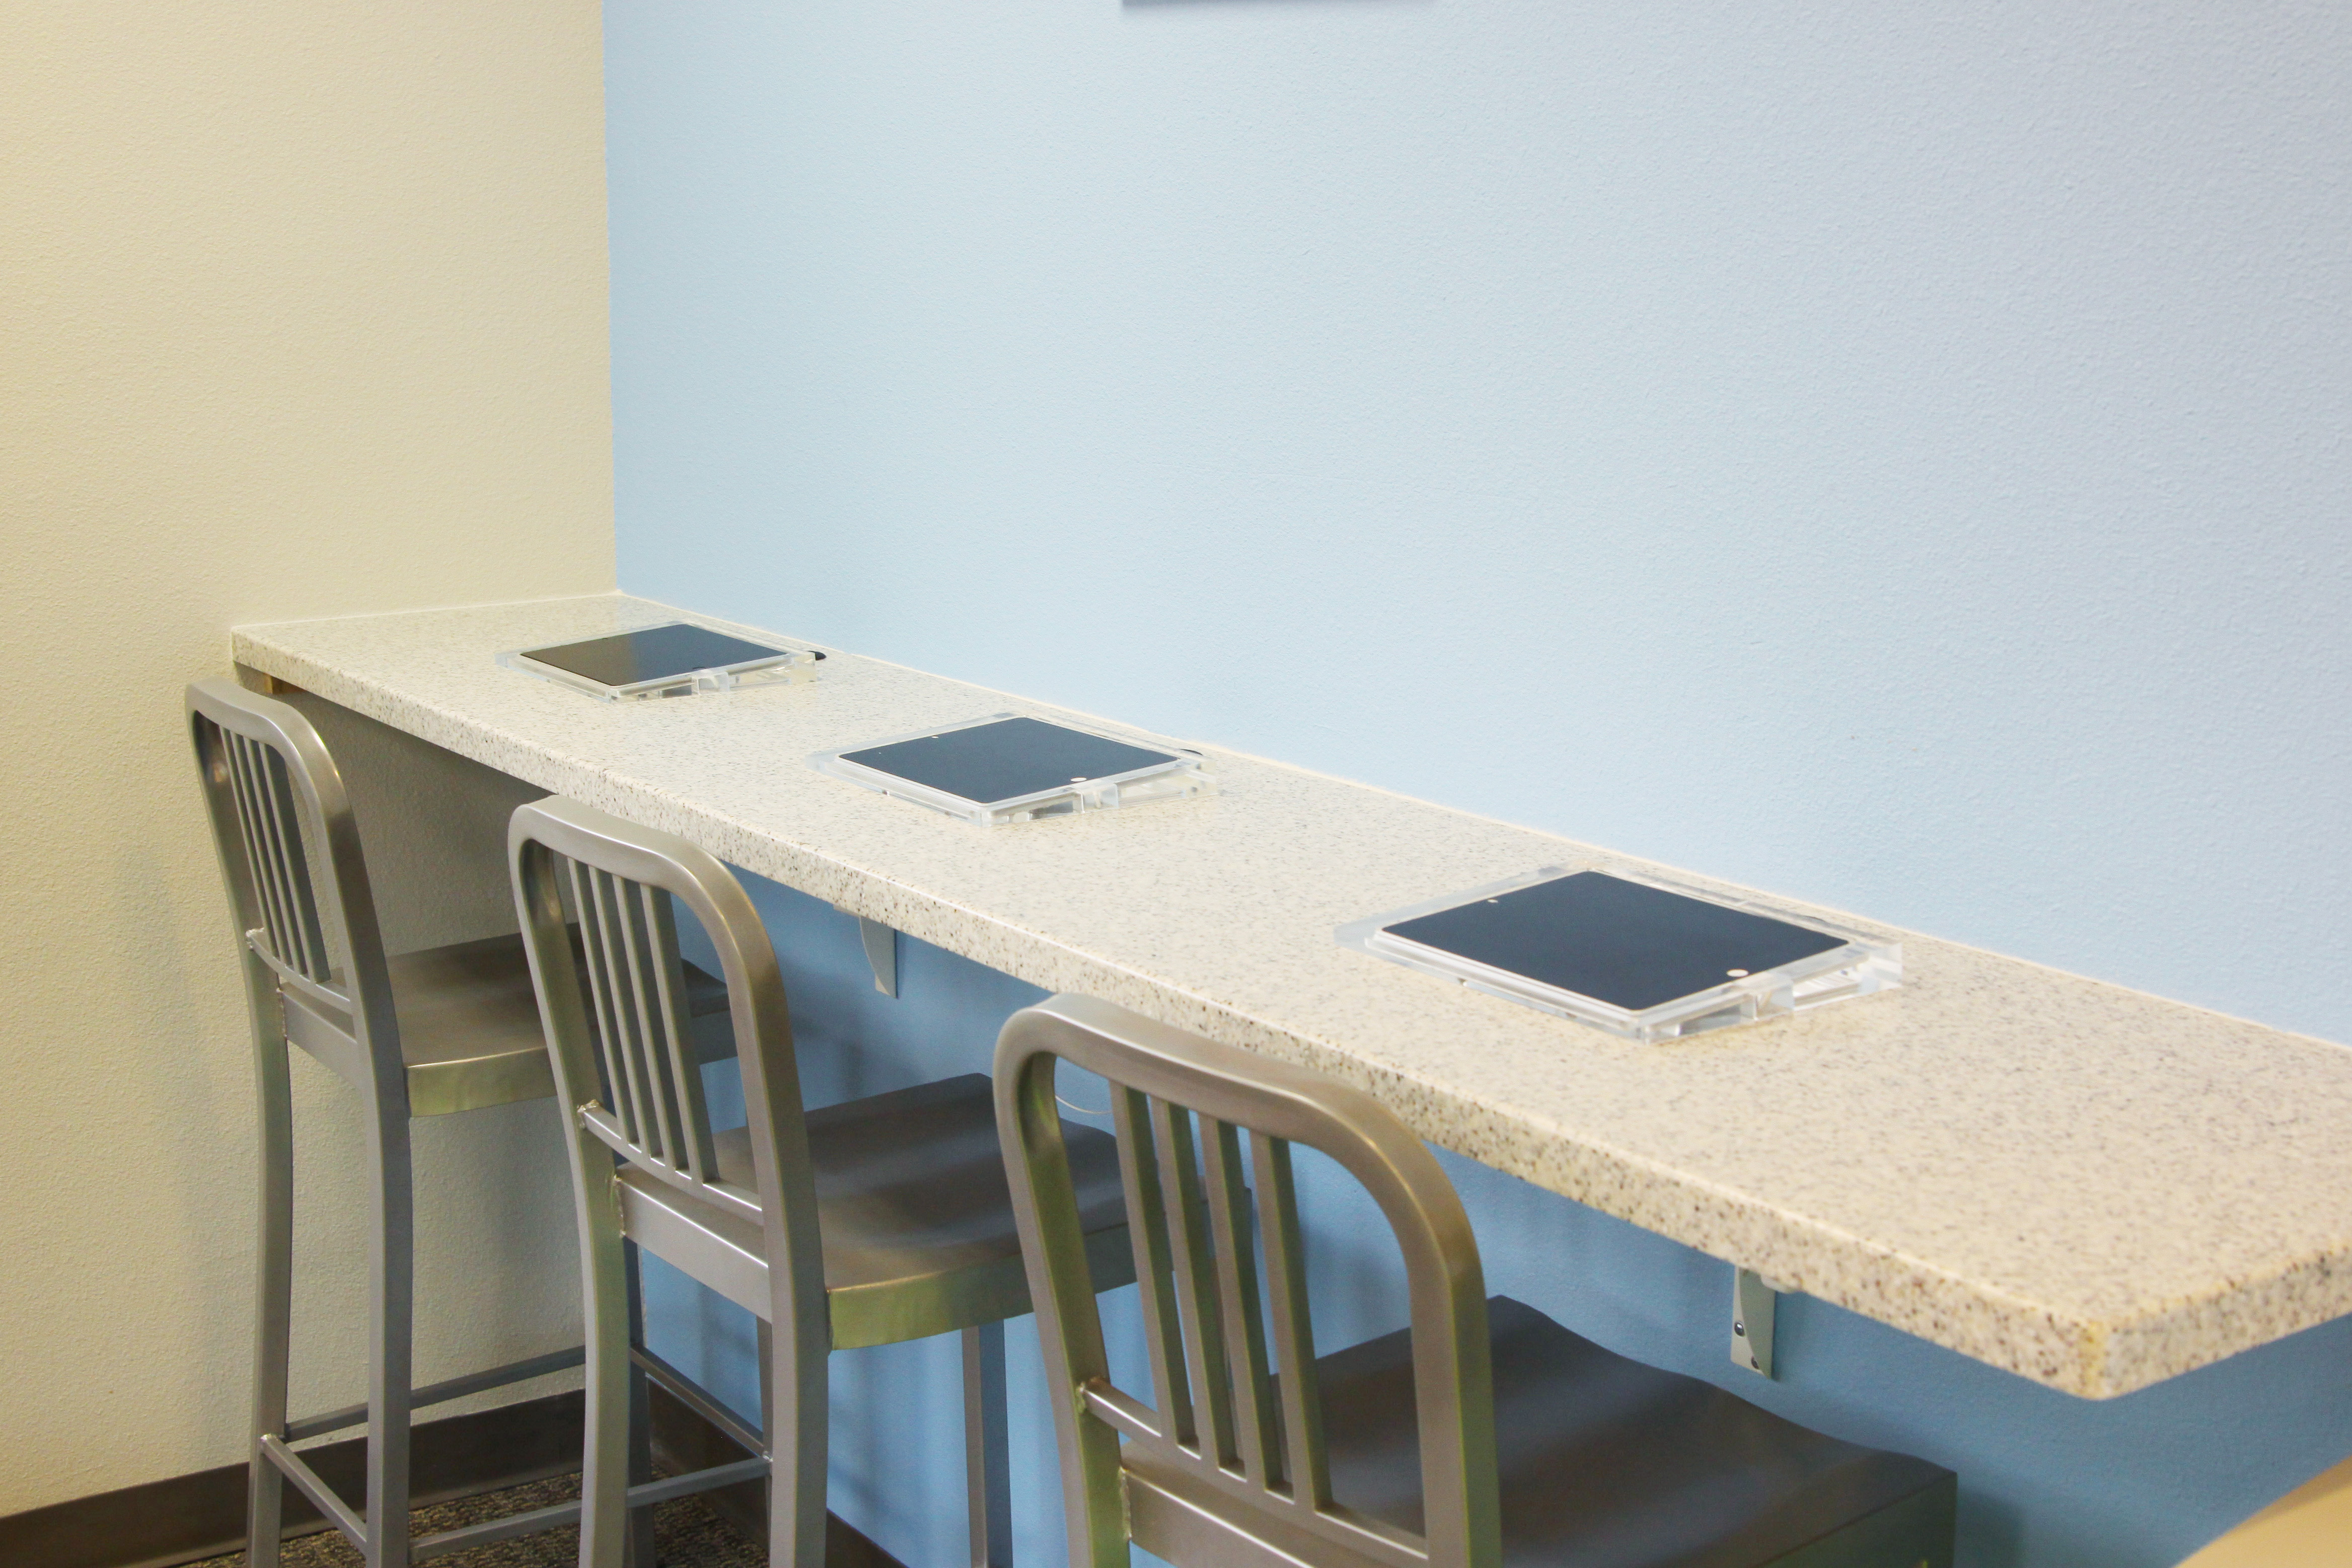 The Ipad bar has been designed for the use of parents to complete forms electronically, and for browsing the internet.